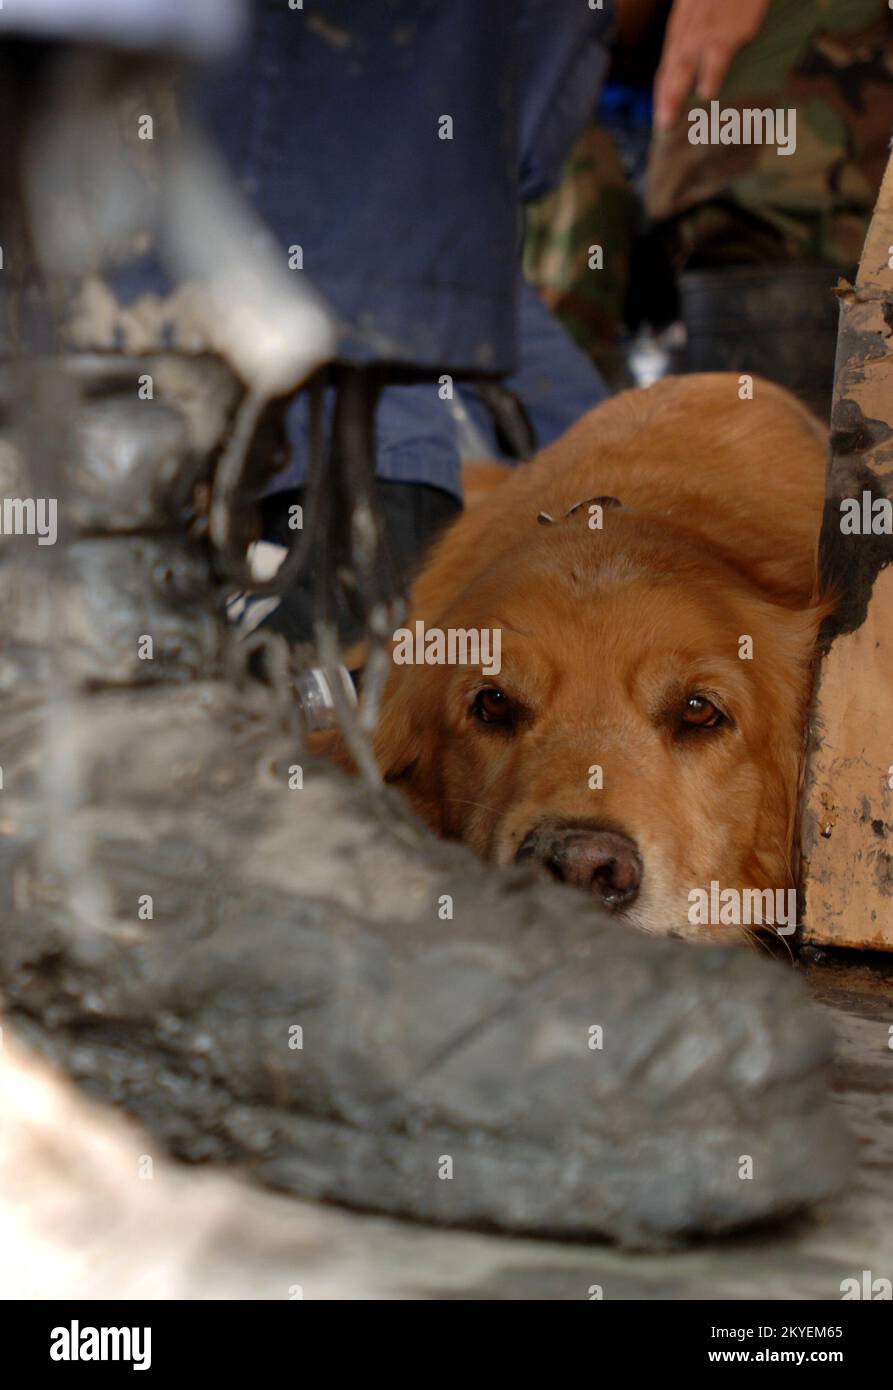 Hurricane Katrina, New Orleans, LA, September 19, 2005 -- A FEMA Urban Search and Rescue dog takes a break by his handlers muddy shoe after searching in neighborhoods impacted by Hurricane Katrina. Jocelyn Augustino/FEMA Stock Photo